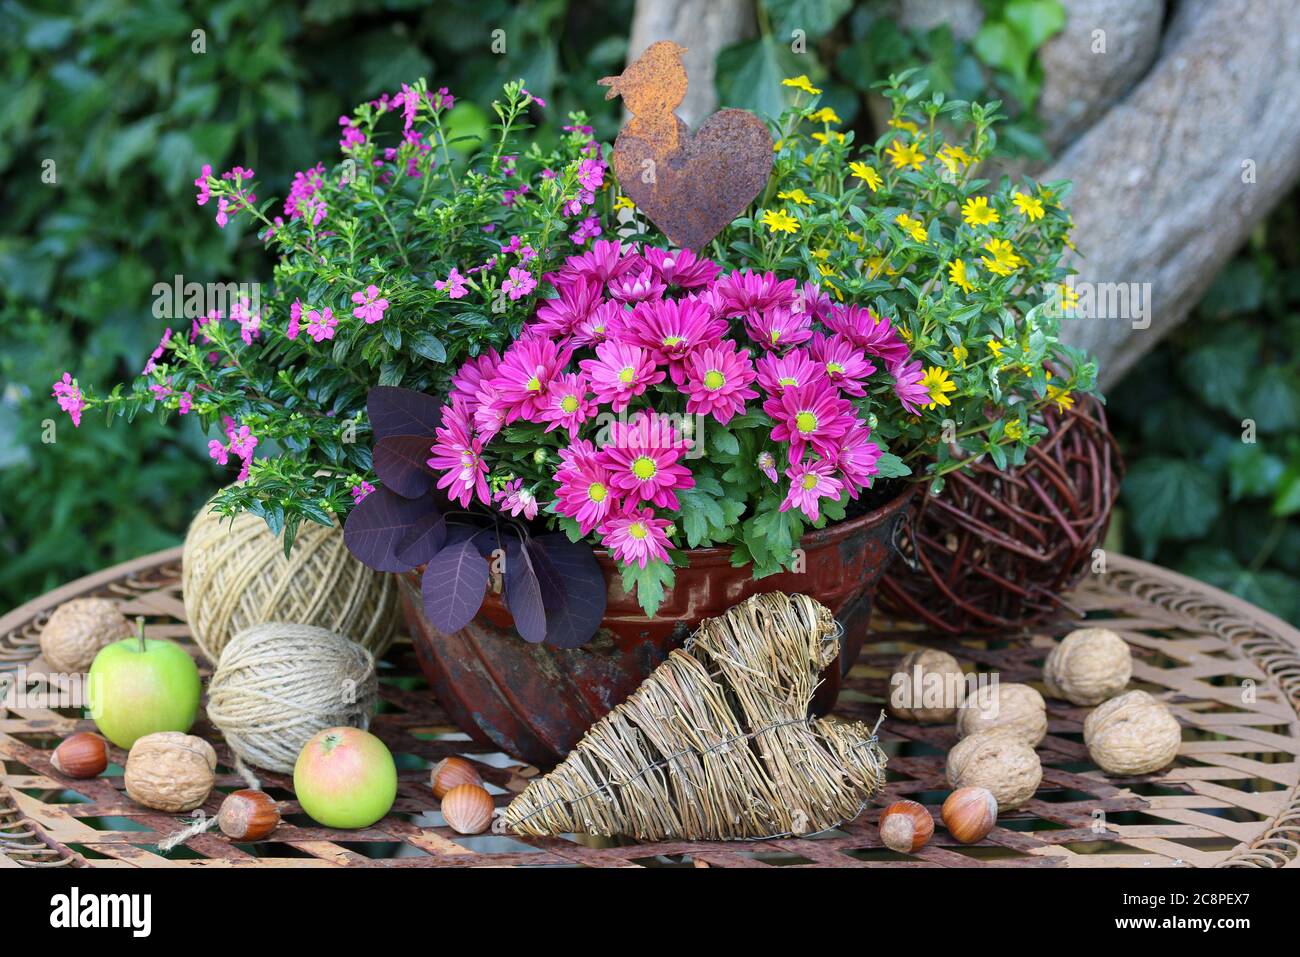 pink chrysanthemum, sanvitalia and false heather in old guglhupf mould Stock Photo